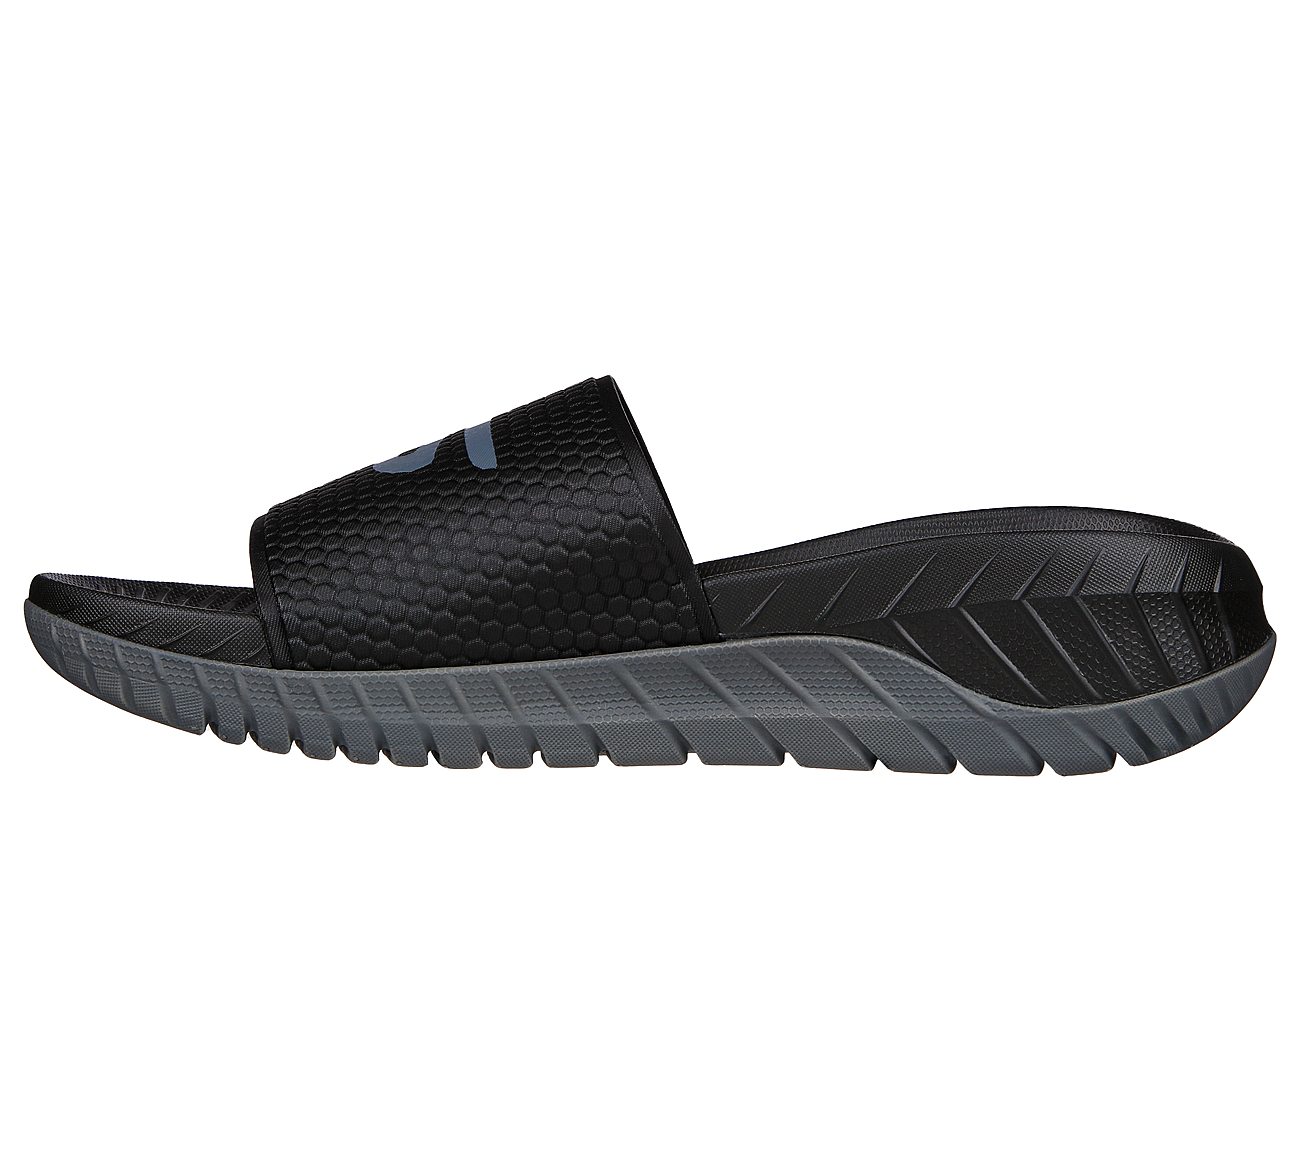 GO RECOVER SANDAL, BLACK/CHARCOAL Footwear Left View